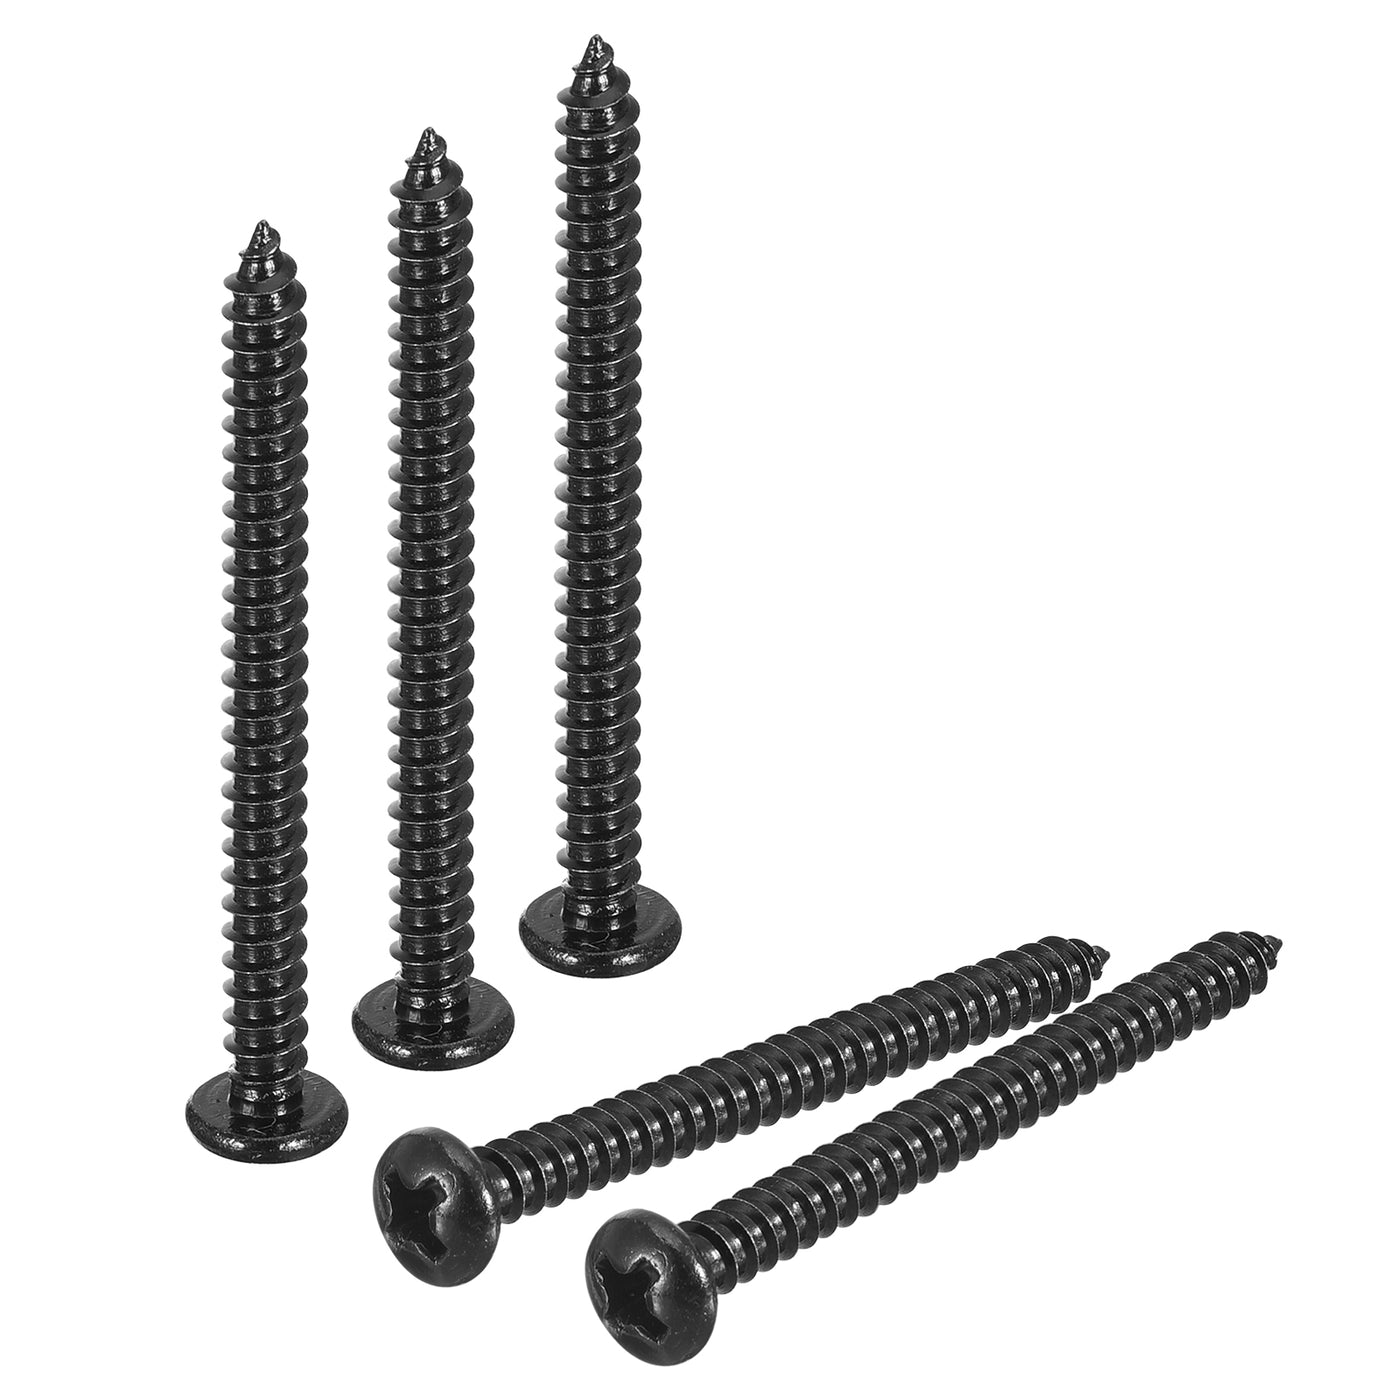 uxcell Uxcell #6 x 1-9/16" Phillips Pan Head Self-tapping Screw, 100pcs - 304 Stainless Steel Round Head Wood Screw Full Thread (Black)